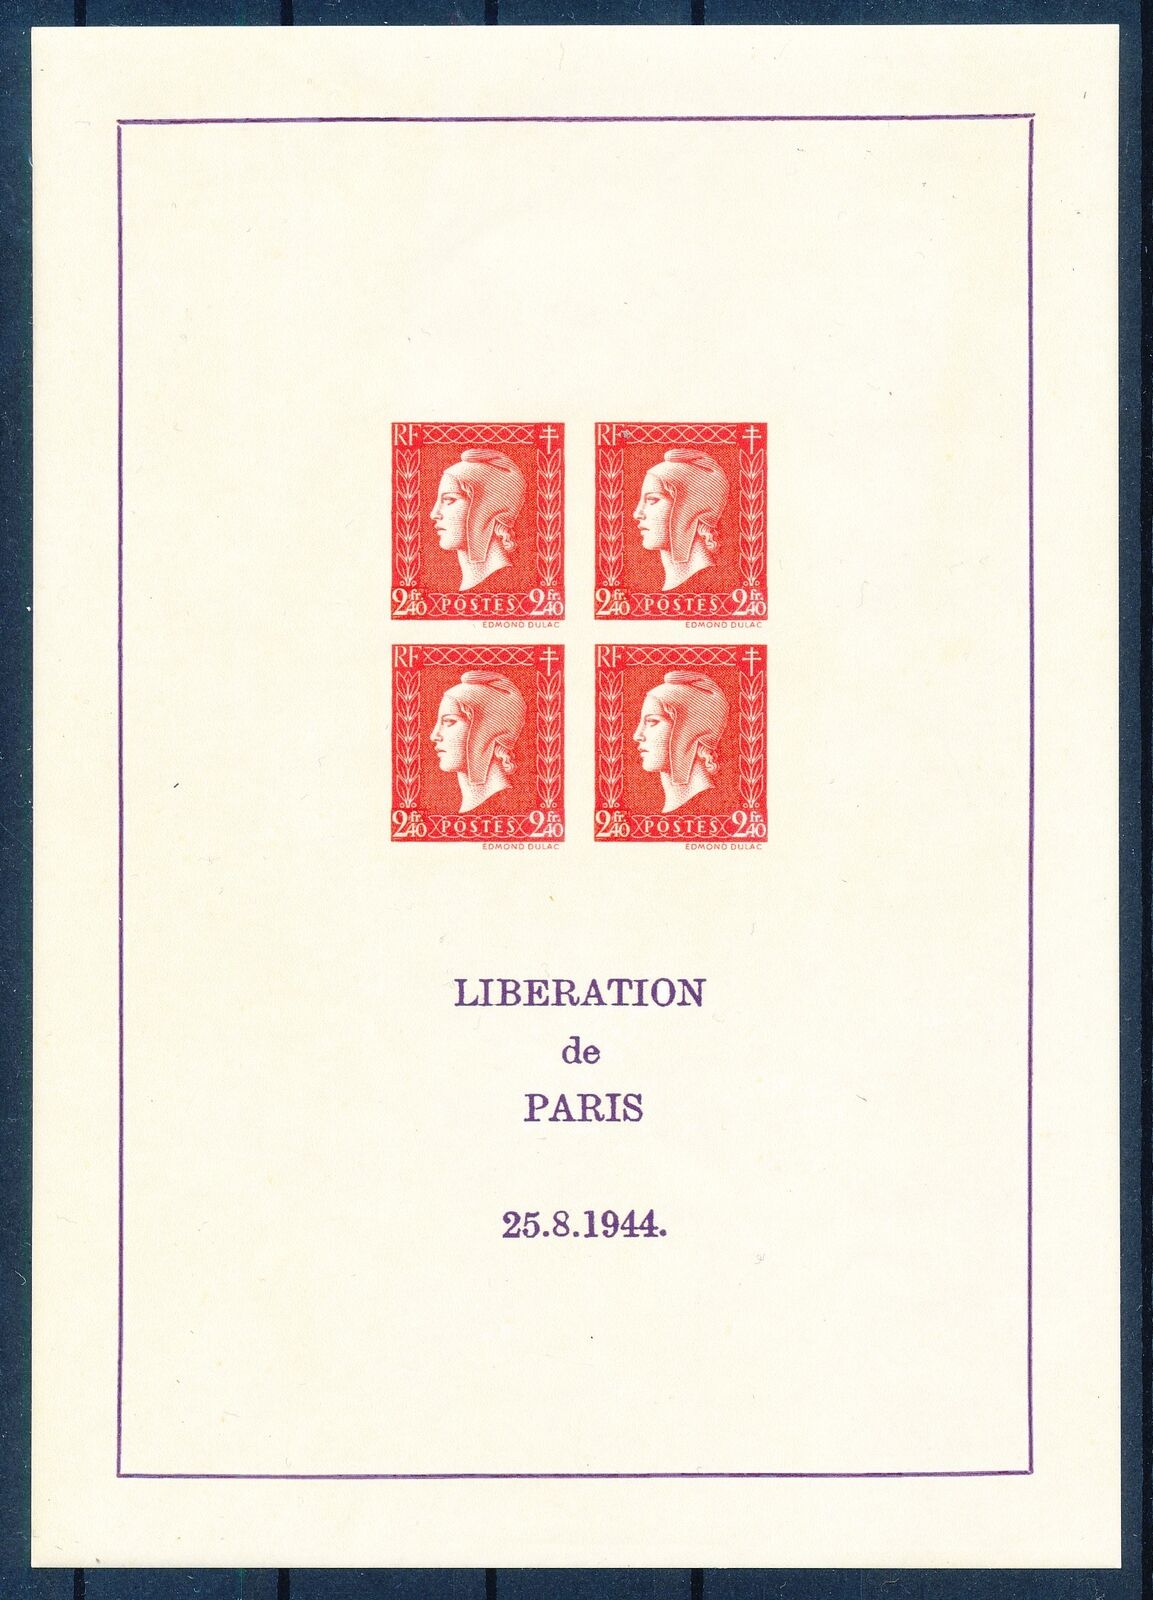 G62141 France 1945 Rare Marianne Dulac Sheet MNH VF multiple signed 9750